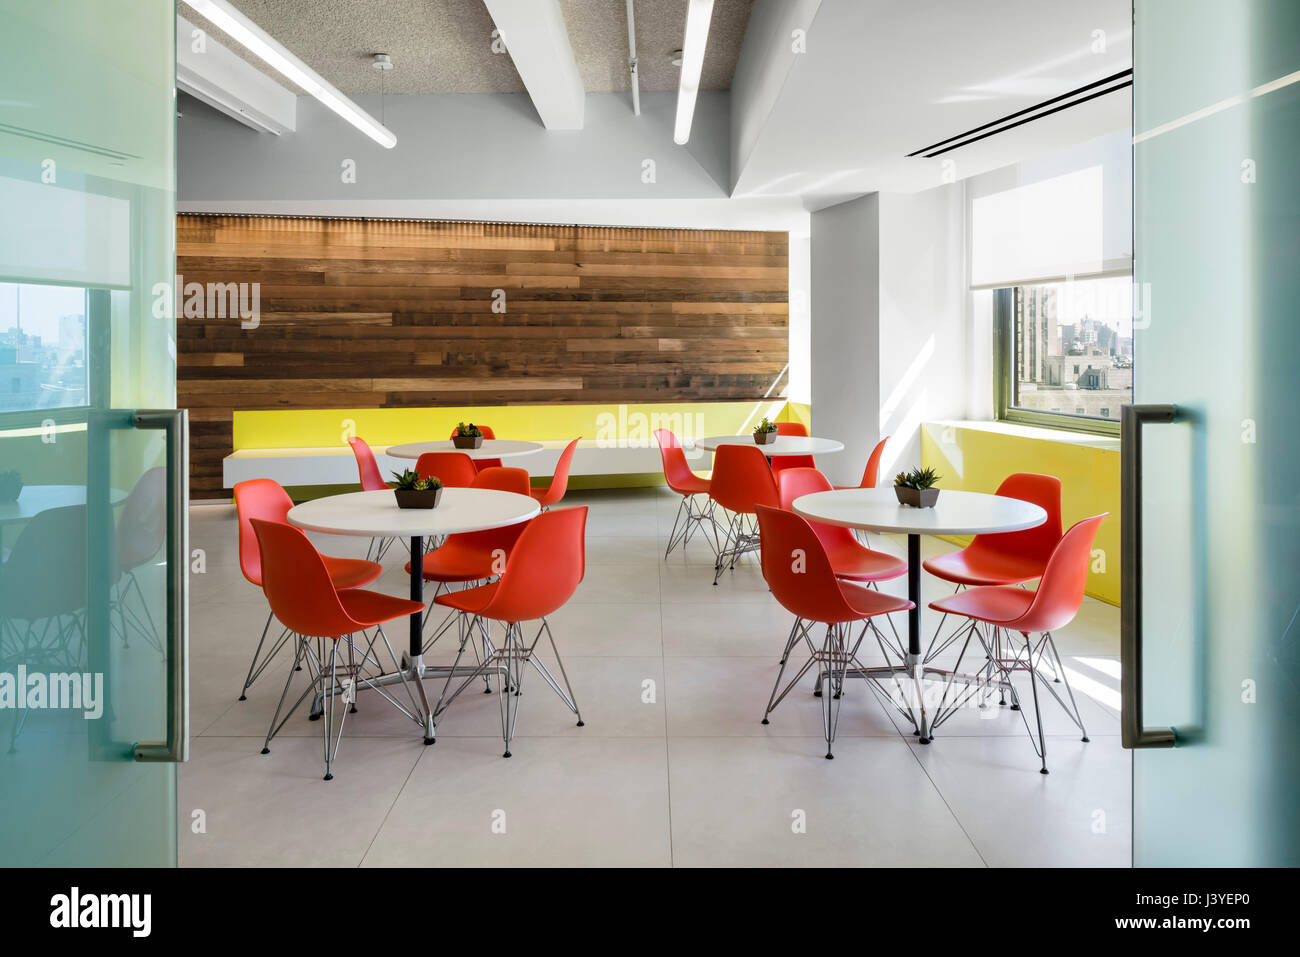 Interior view of the canteen. 2 Lafayette Street  NYC Department of Youth, New York, United States. Architect: BKSK Architects, 2015. Stock Photo